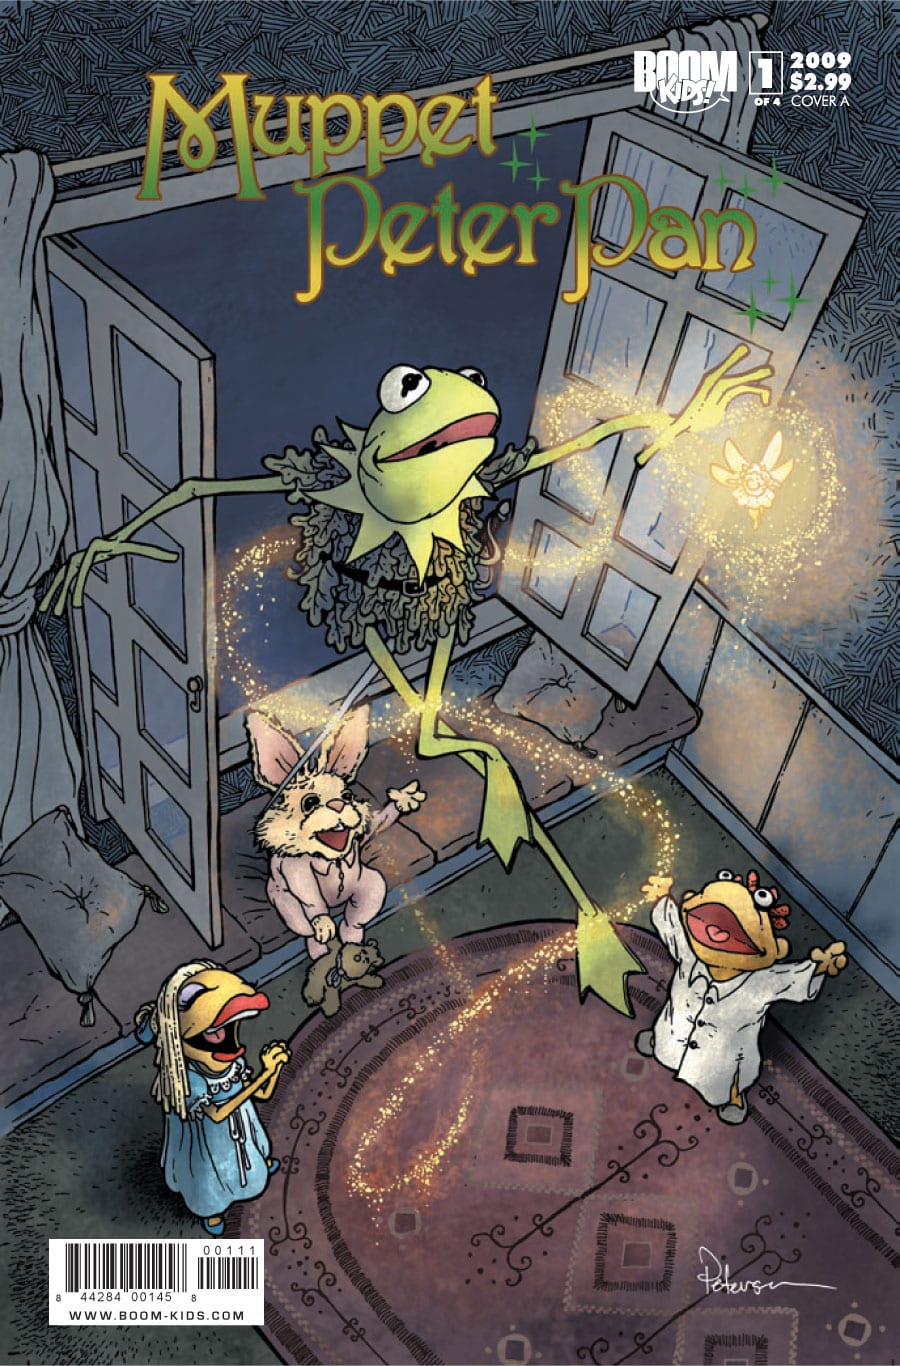 Comic completo Muppet: Peter pan